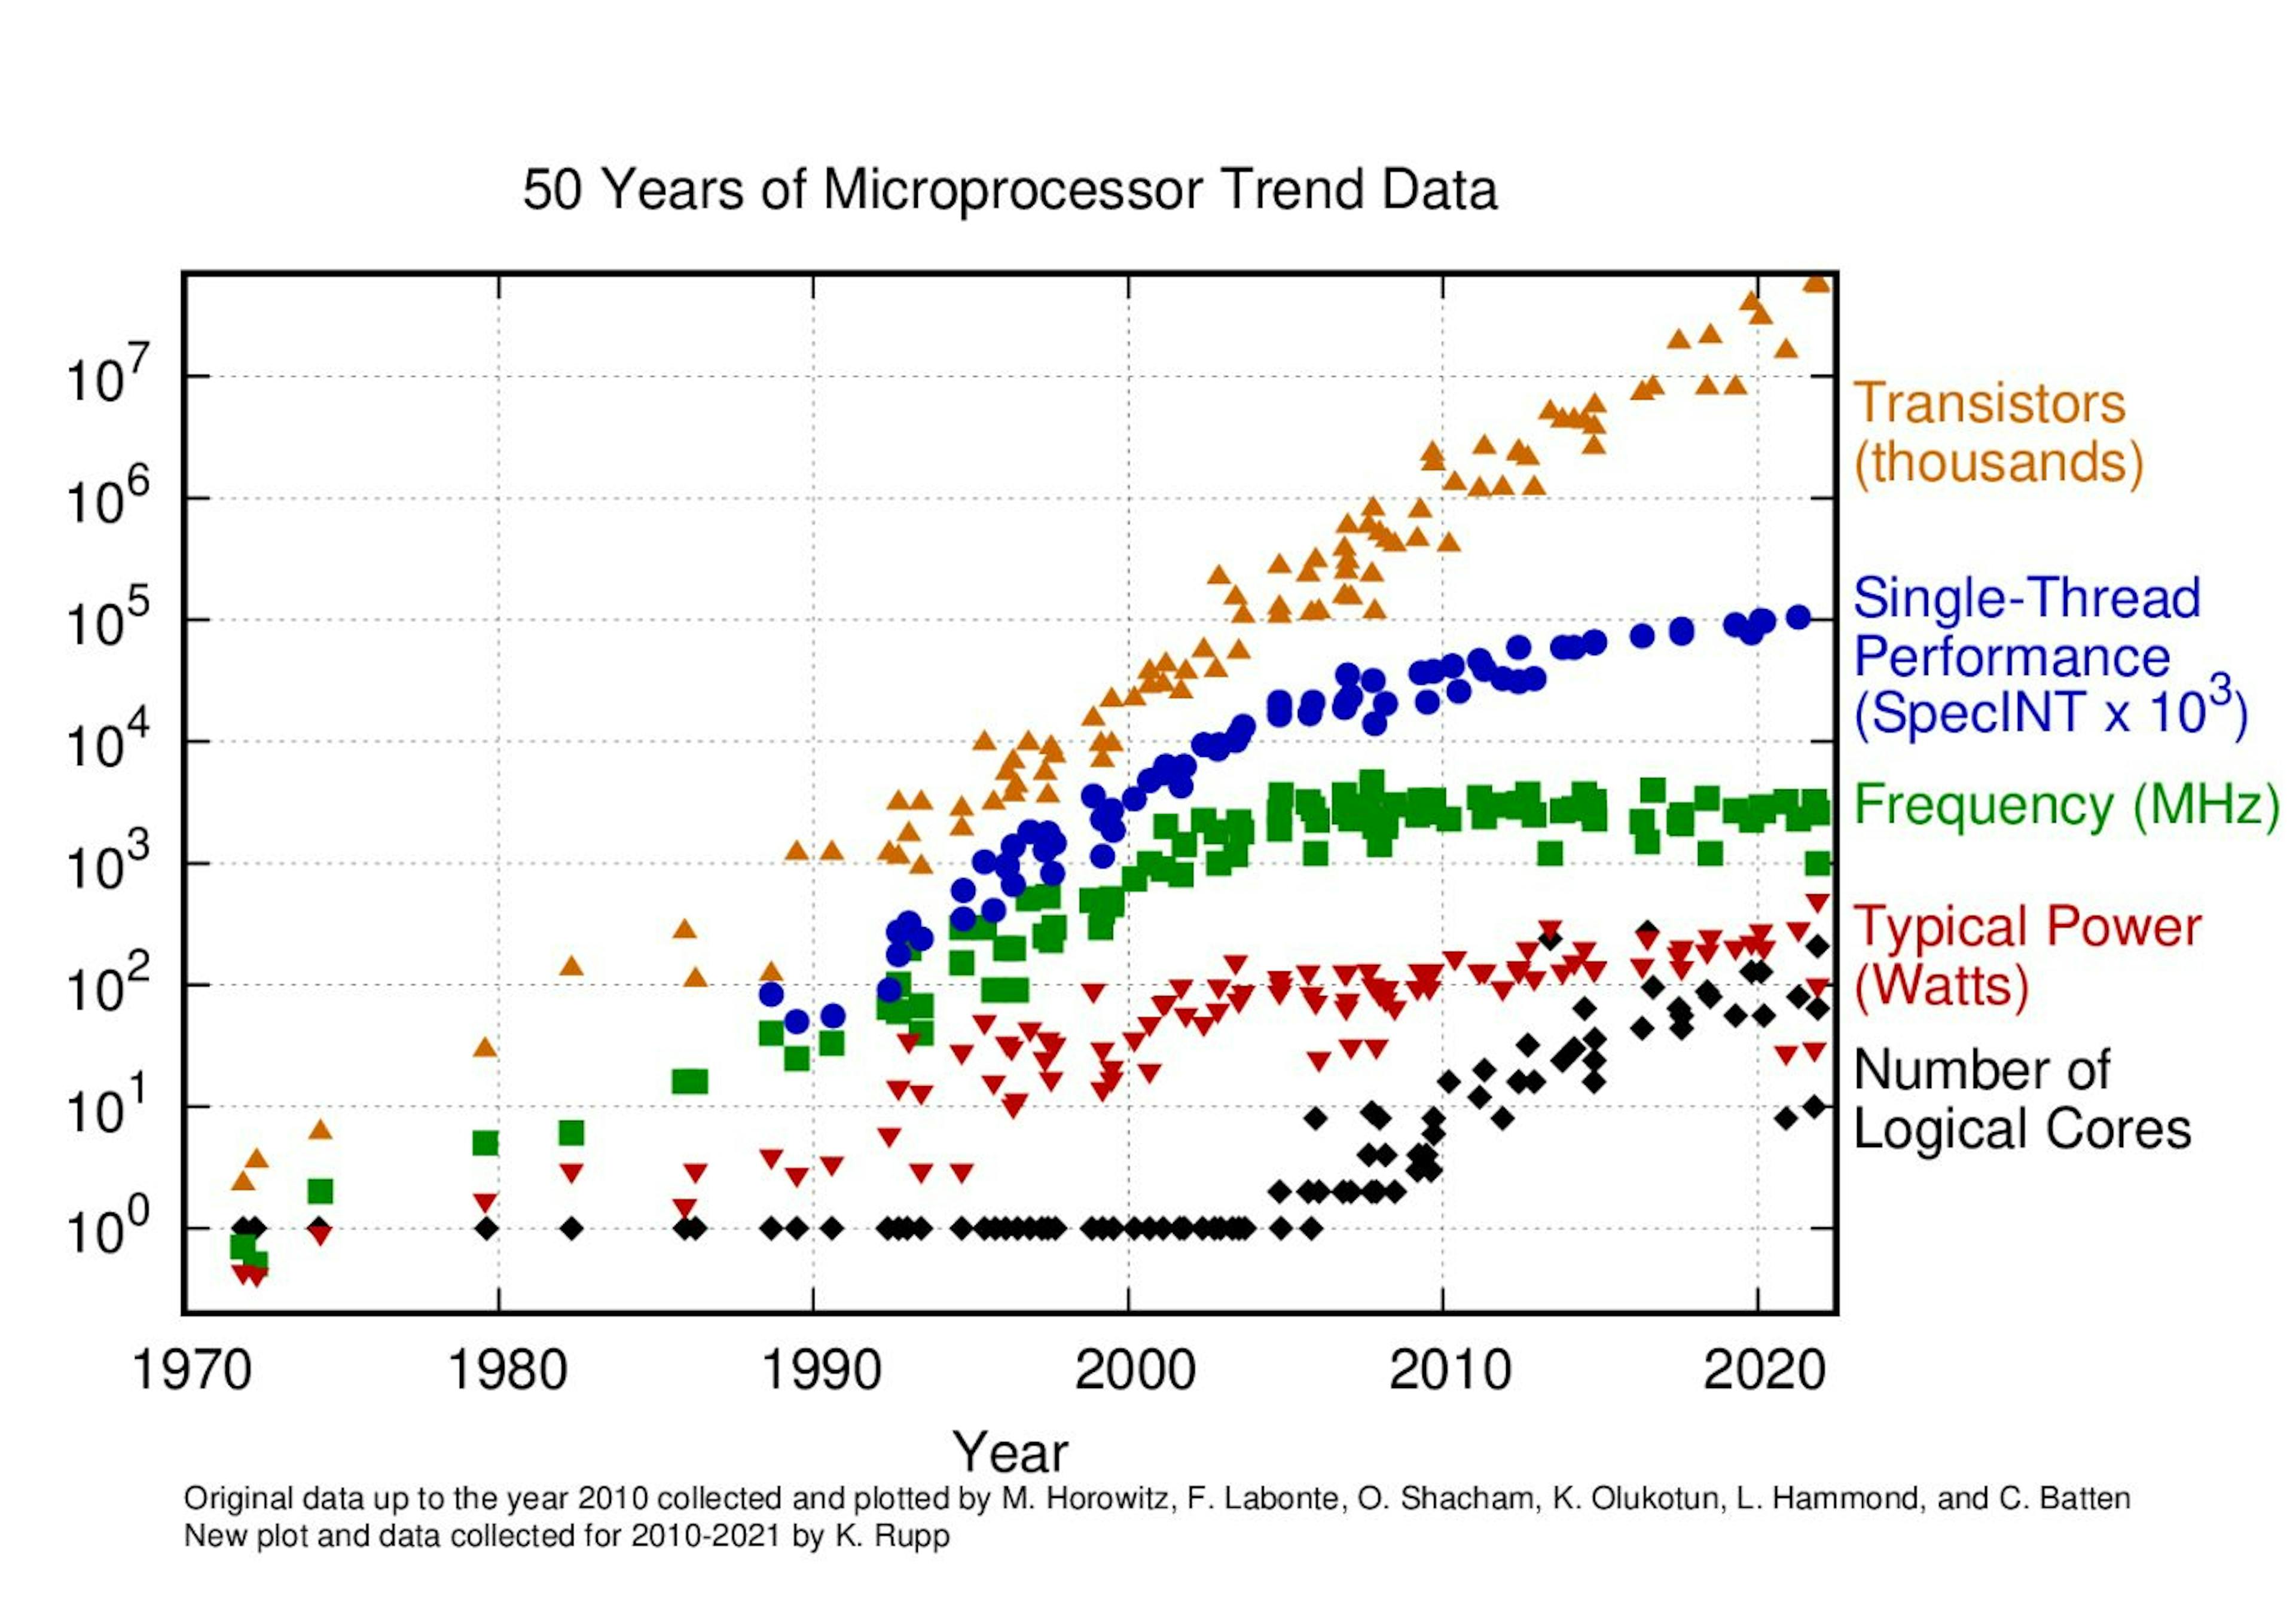 Source: karlrupp/microprocessor-trend-data: Data repository for my blog series on microprocessor trend data. (github.com)